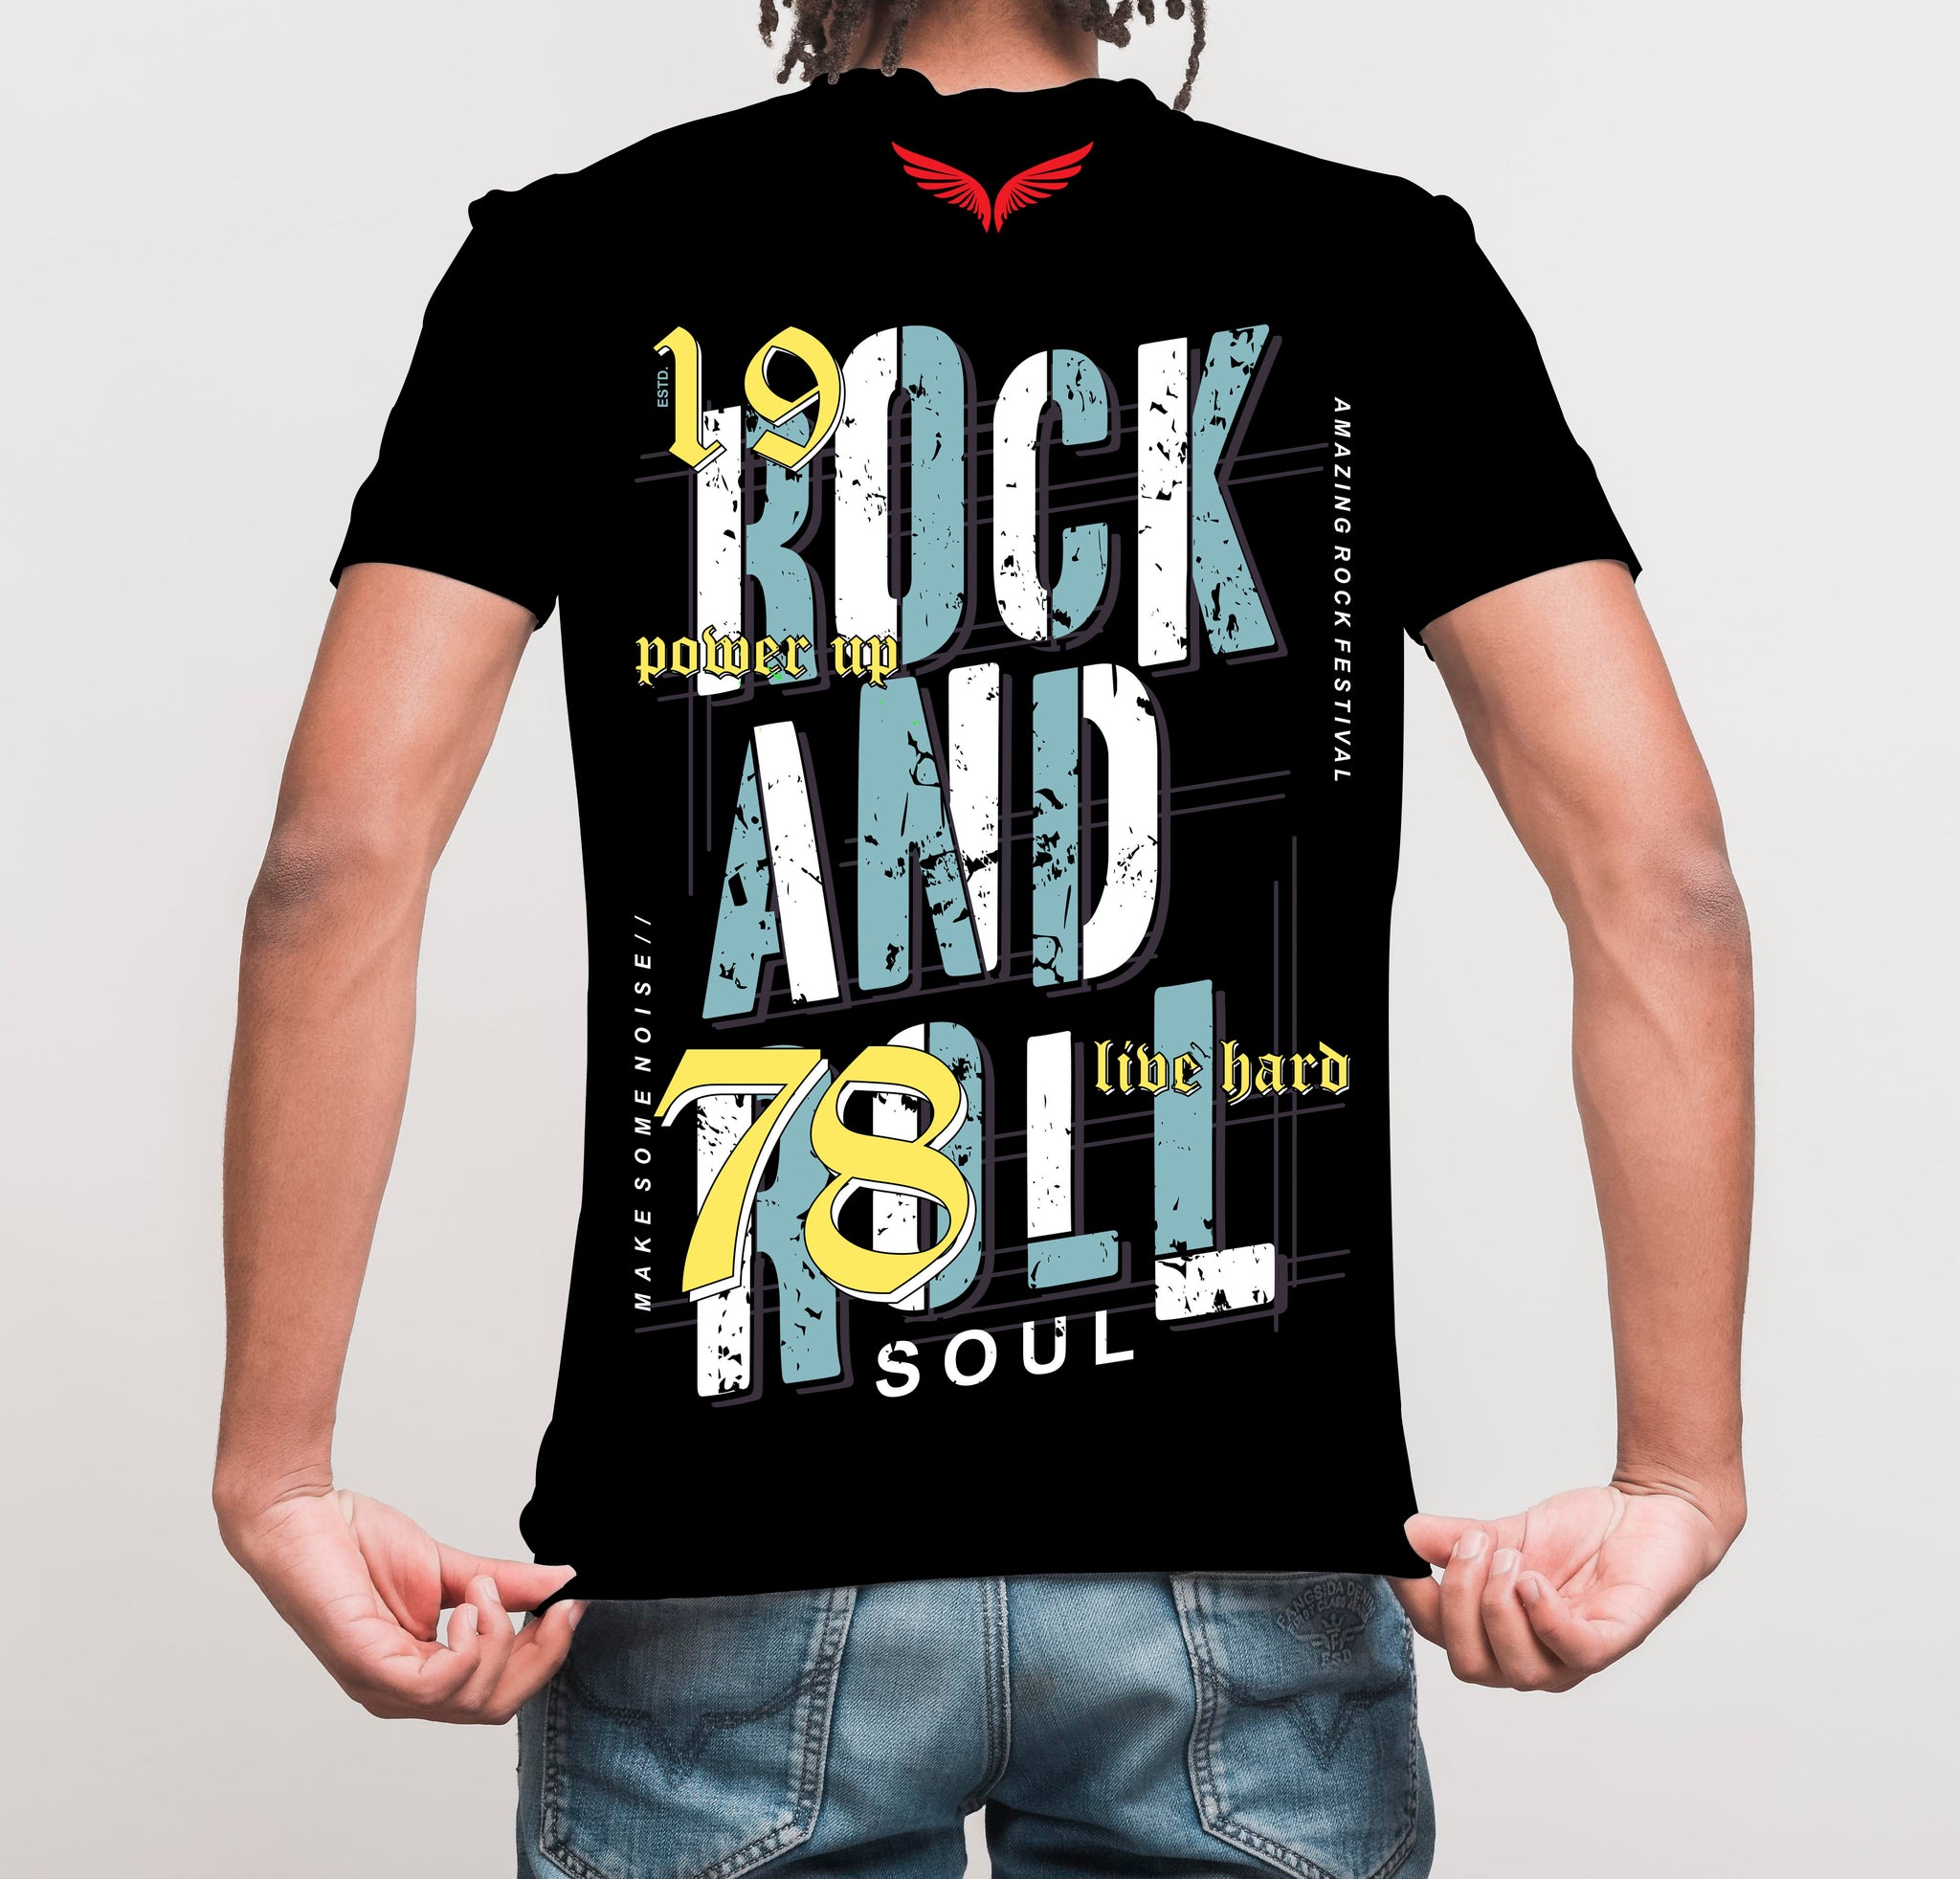 Men's Rock and Roll Printed T shirt